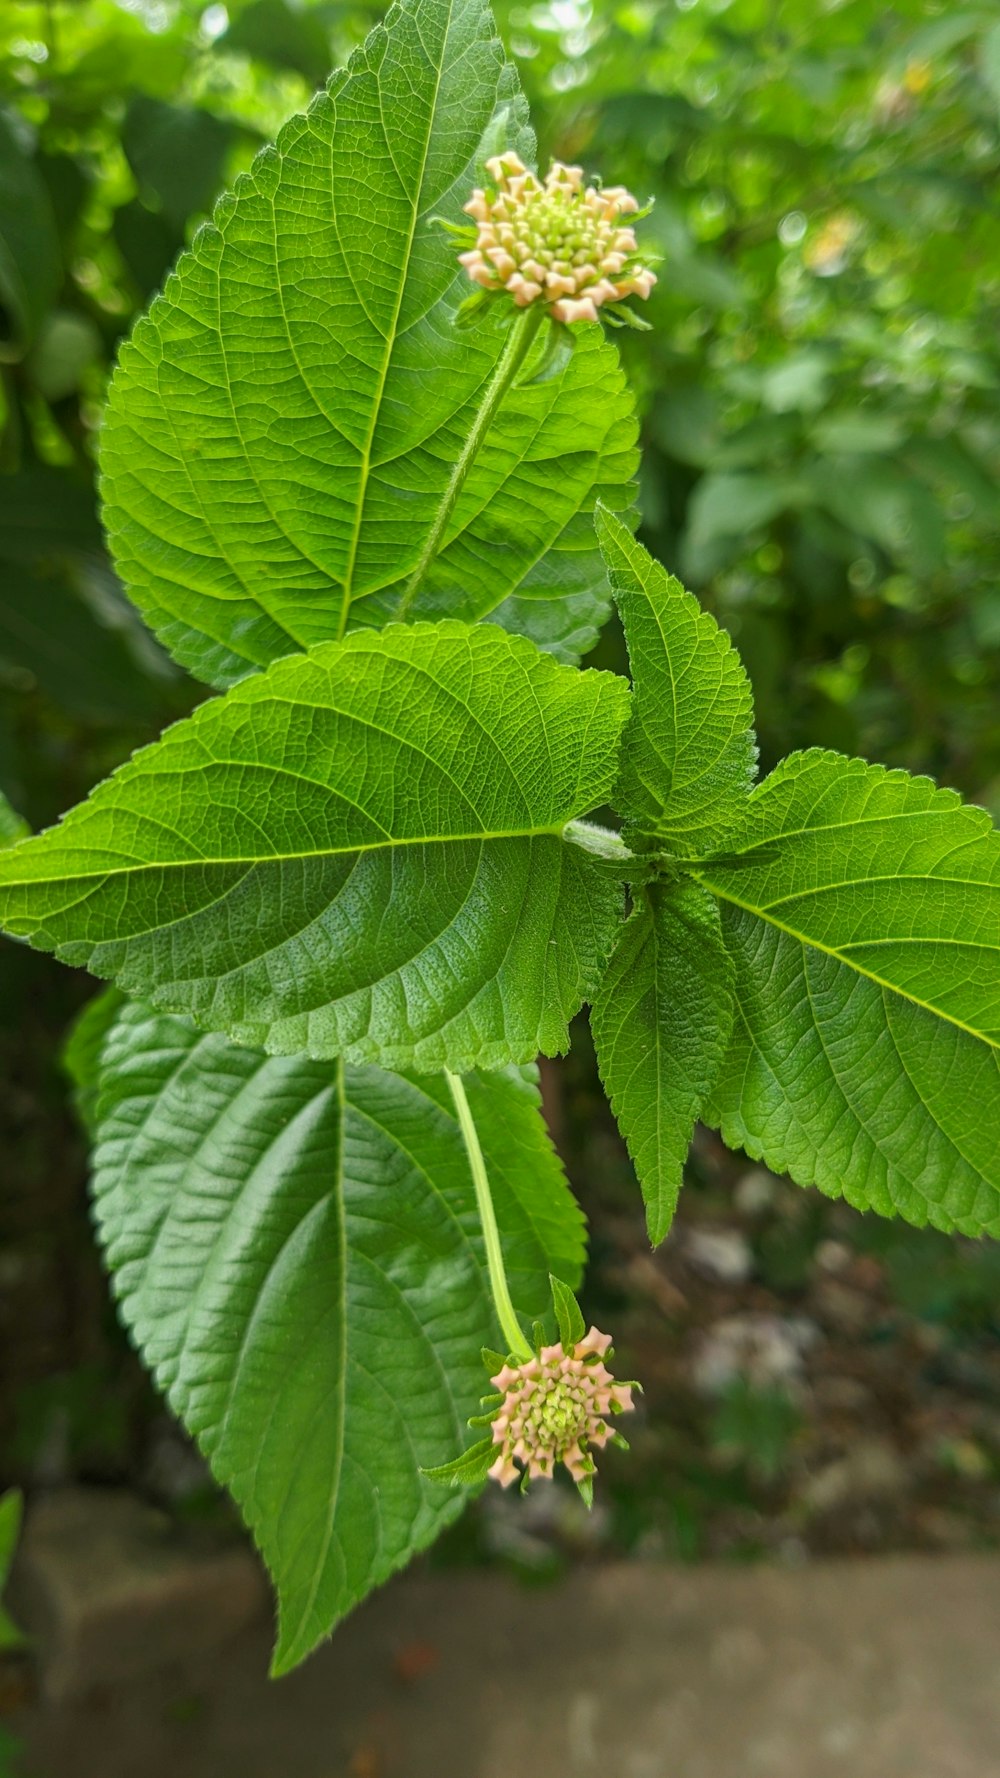 a close up of a green leaf with small flowers